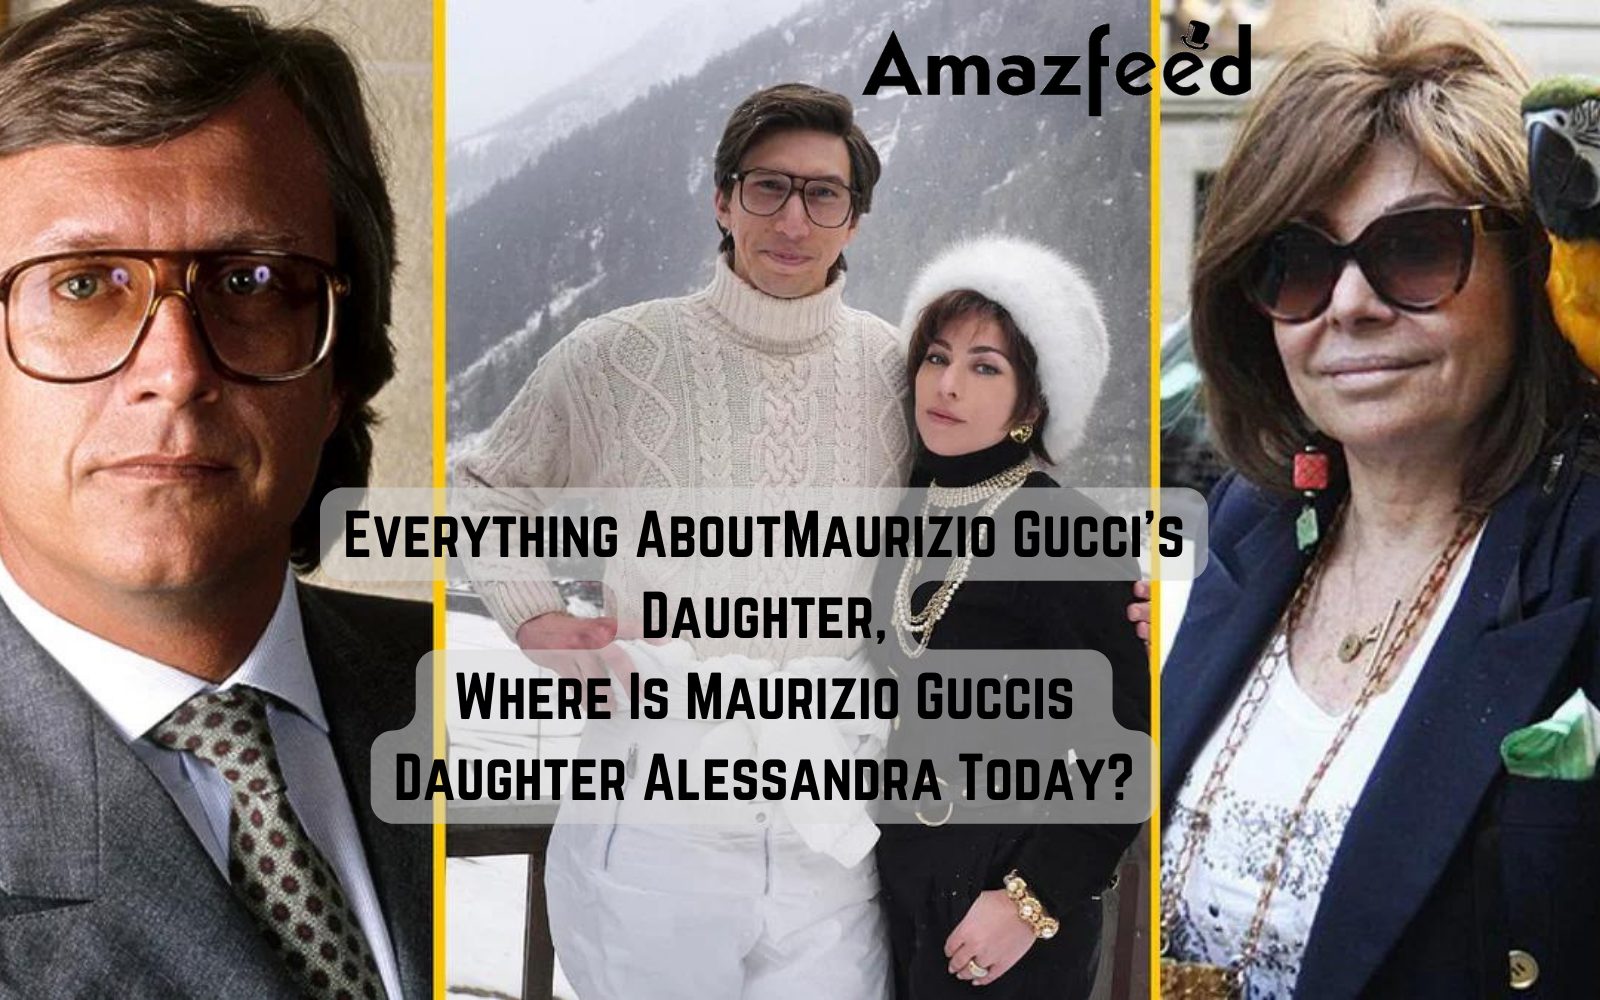 Everything About Maurizio Gucci's Daughter, Where Is Maurizio Guccis  Daughter Alessandra Today? » Amazfeed